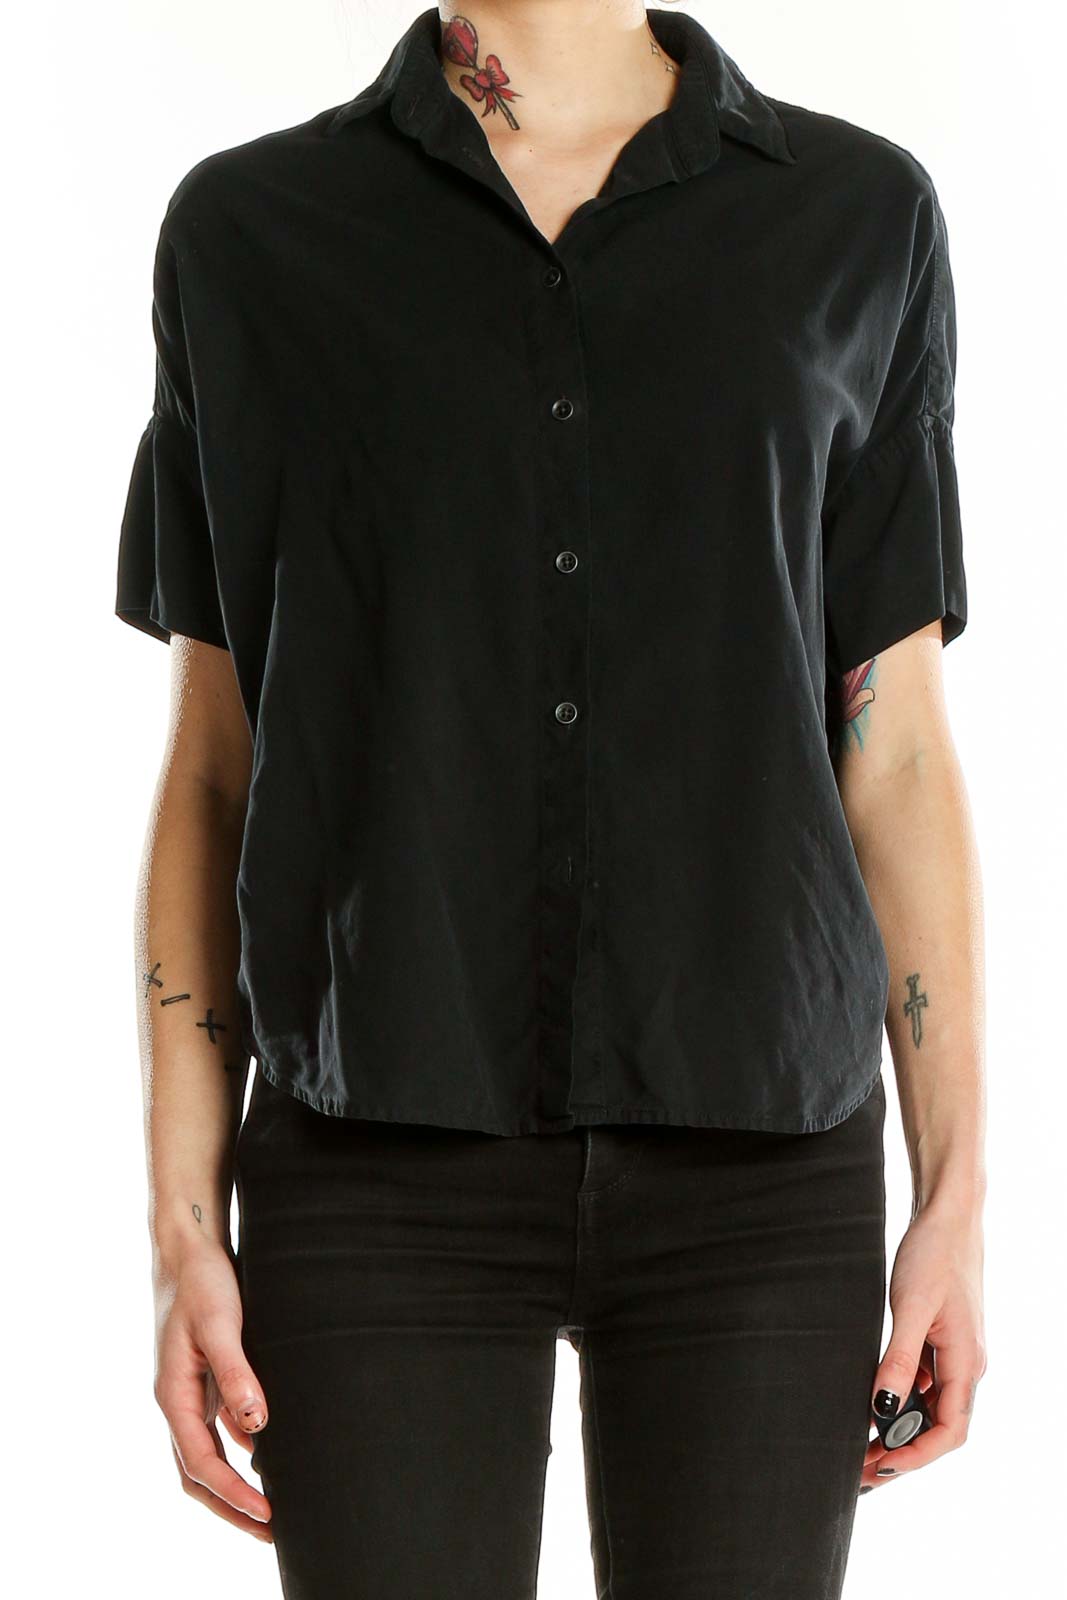 Black All Day Wear Casual Shirt Front